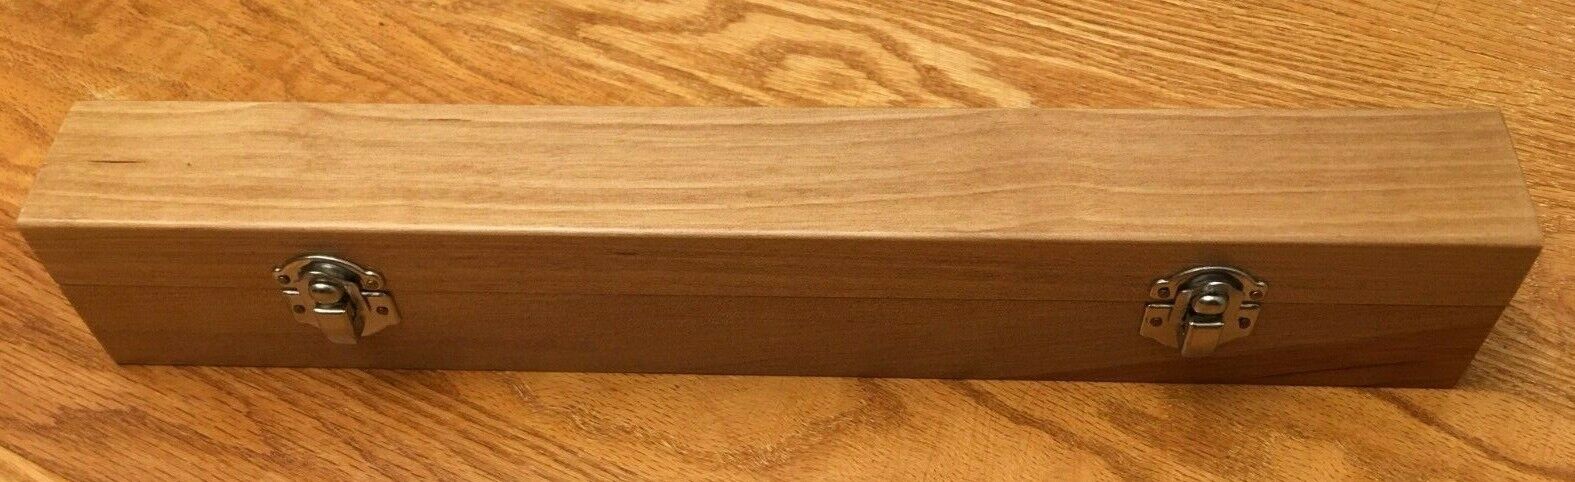 New solid wood box for long tools or rules